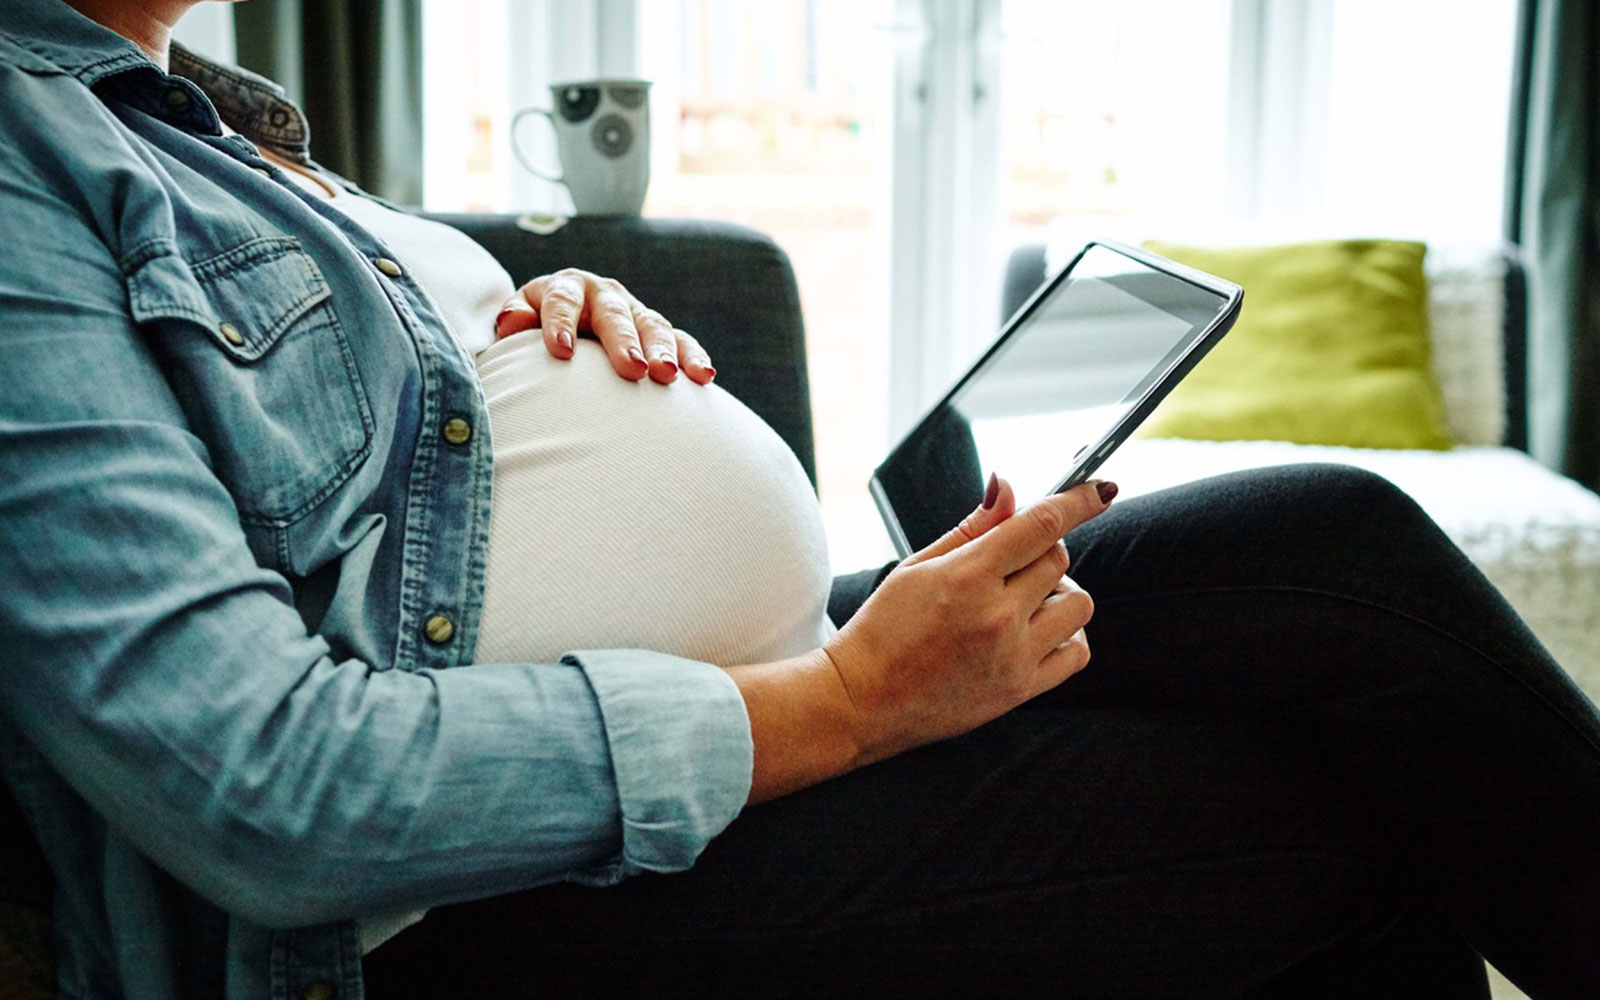 Pregnant woman using a tablet device